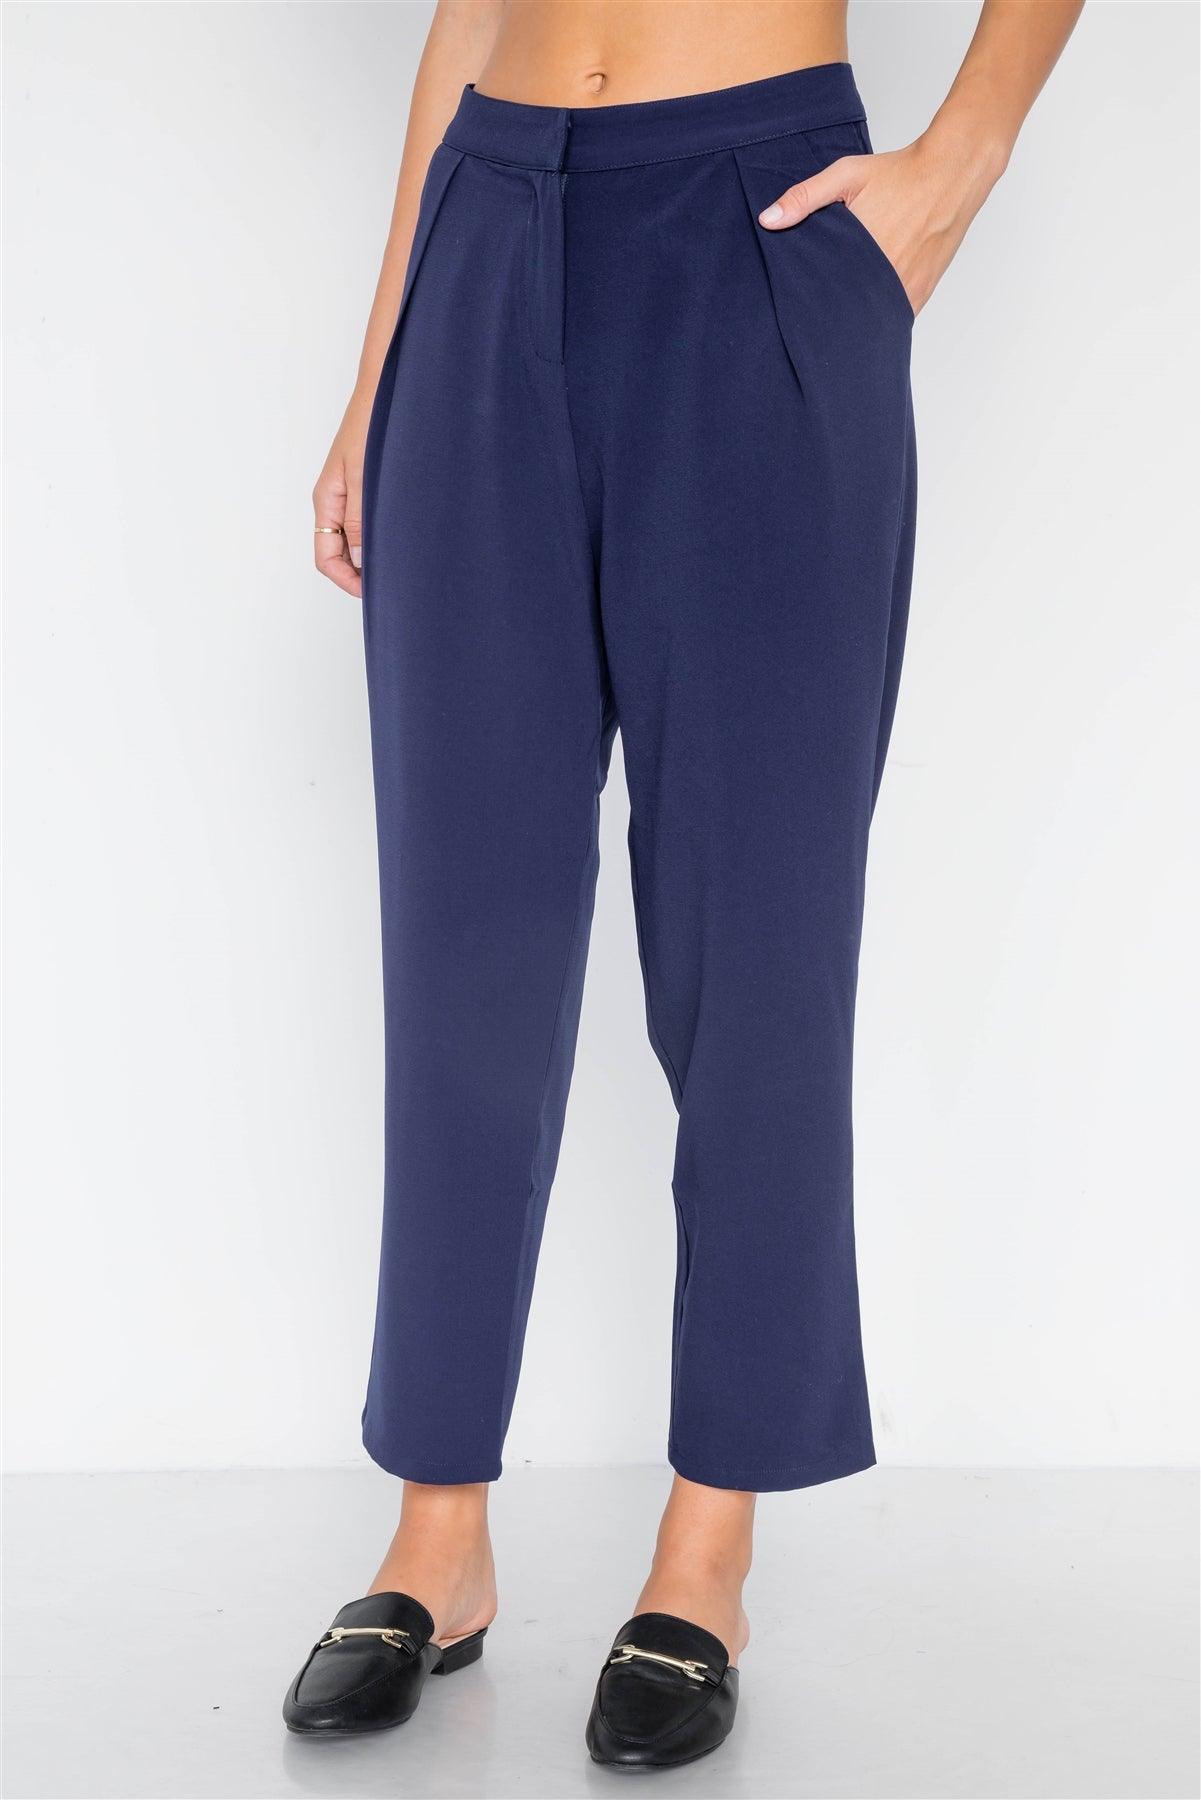 Navy Cropped Ankle Leg Pants